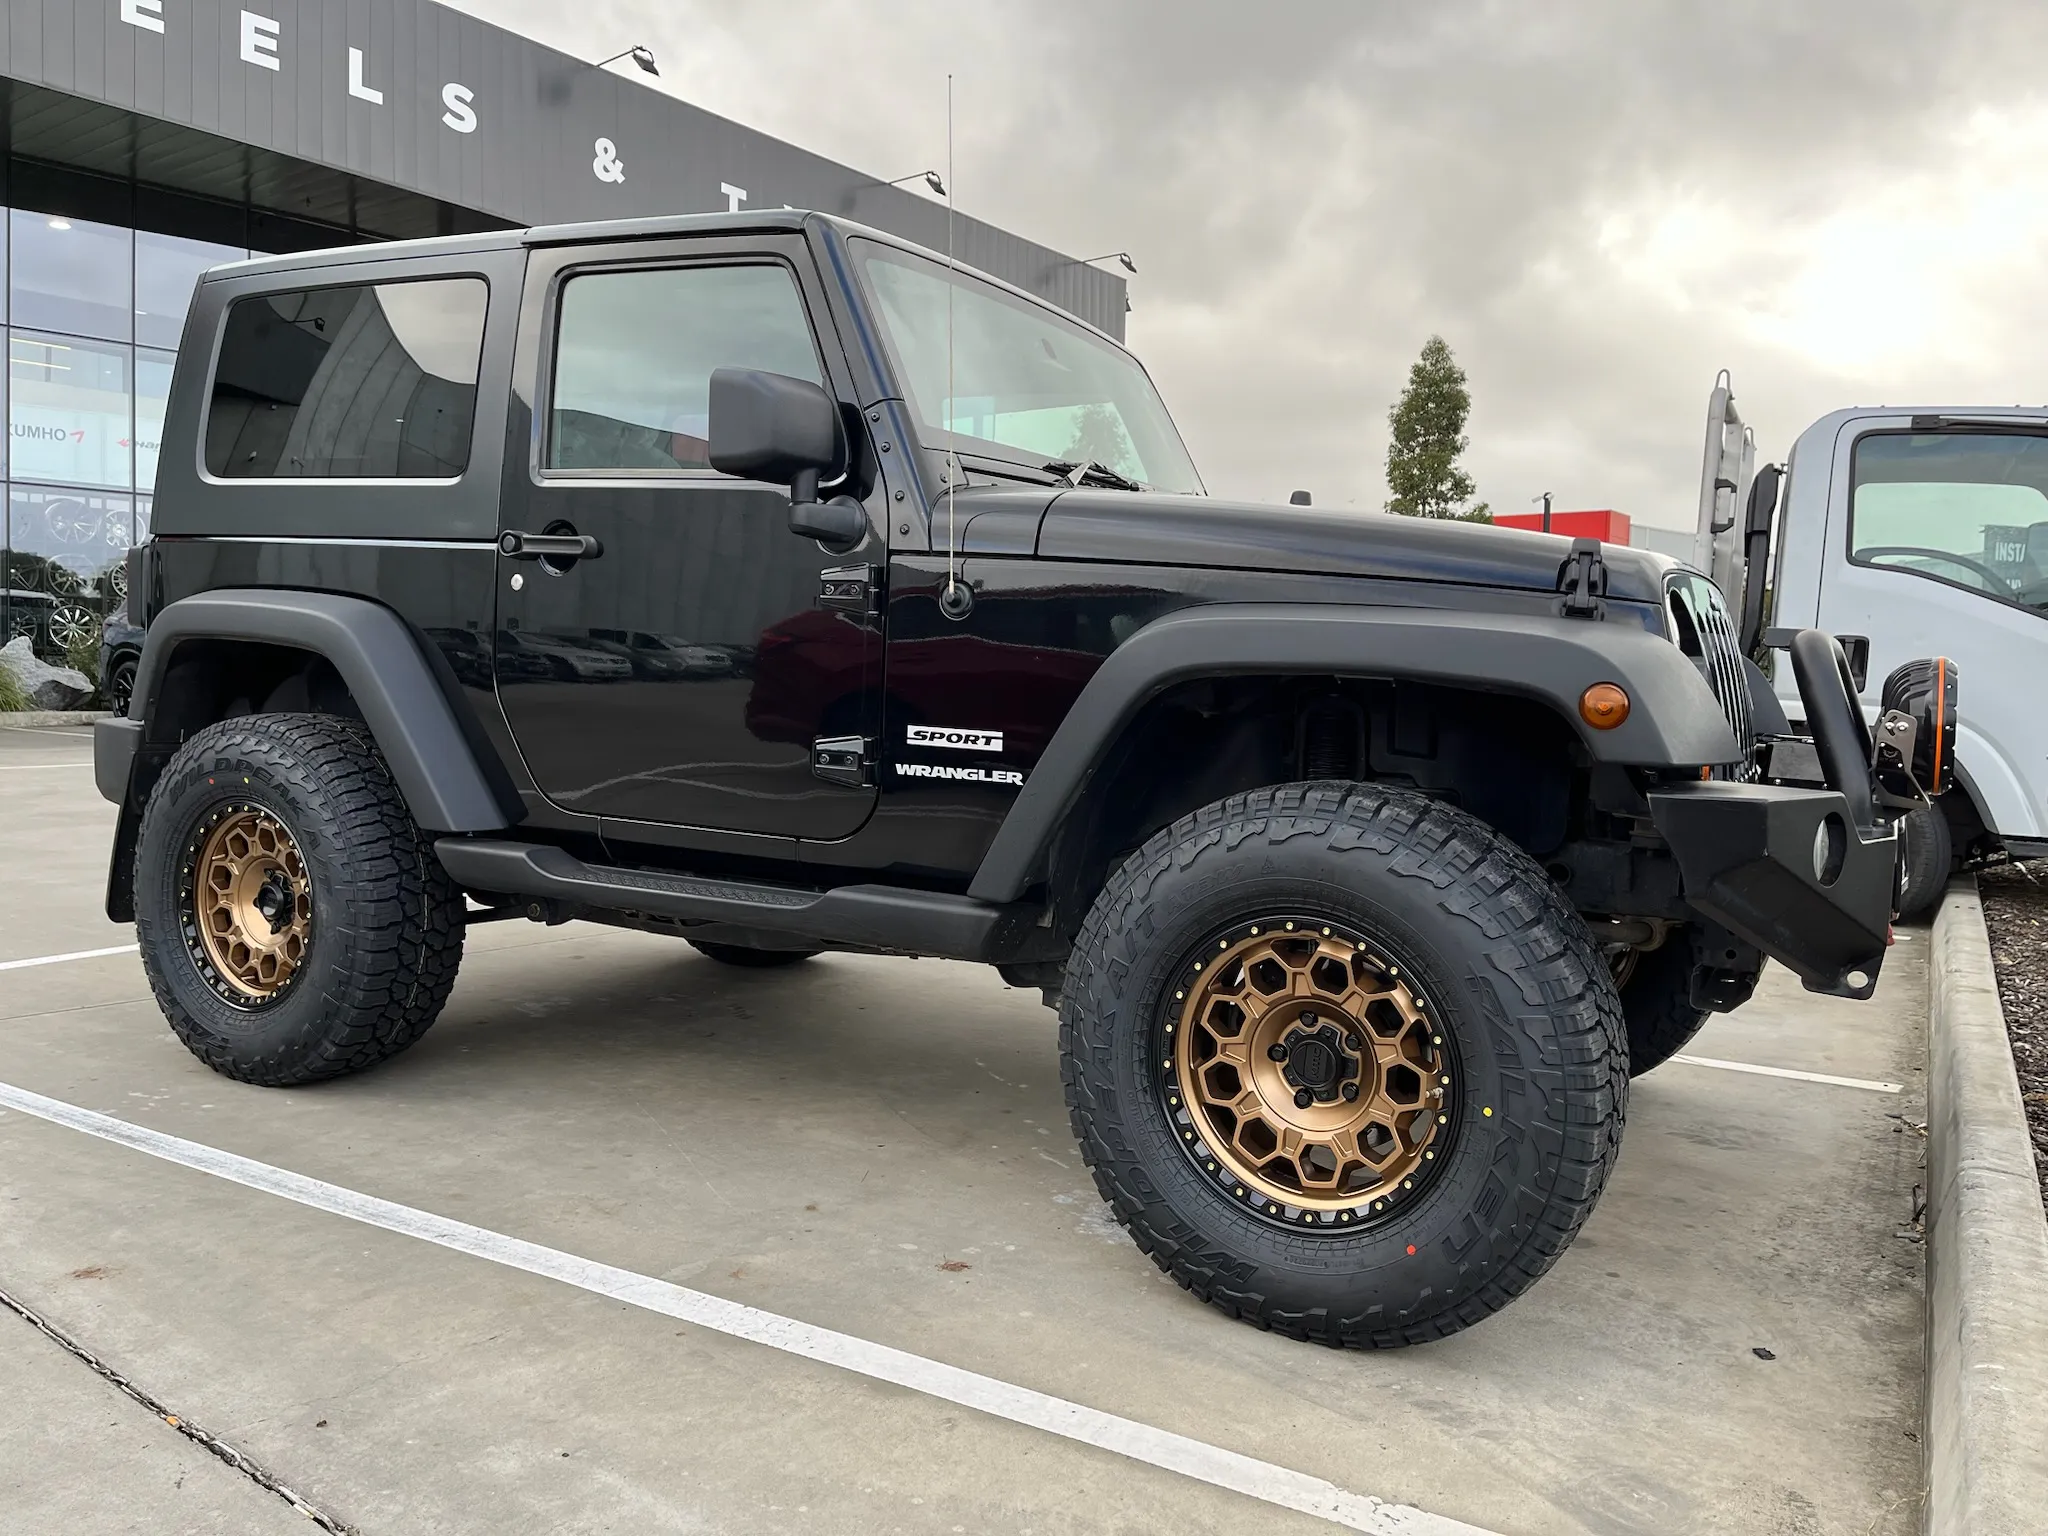 JEEP WRANGLER with KMC 545 17X9 and FALKEN WILDPEAK AT3W |  | JEEP